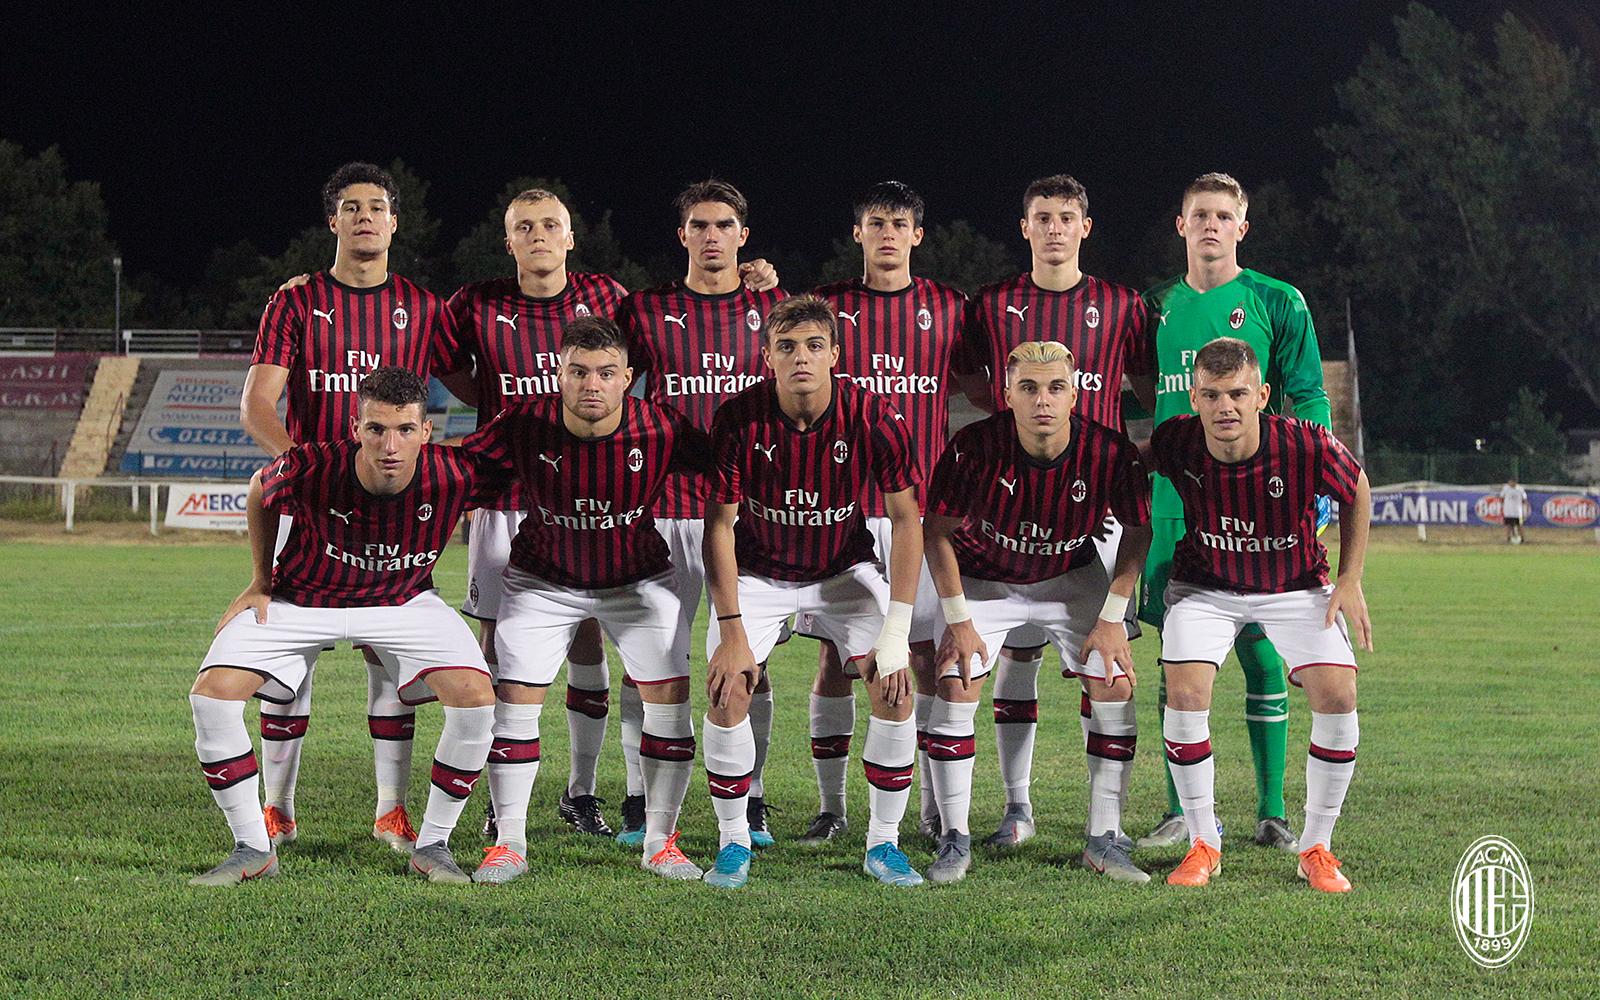 Paolo Maldini Fans on Twitter: "Ac Milan Primavera team won the "Mamma Cairo Trophy", after beating Inter and Here's some pics of https://t.co/3y99Y5ZHt3" / Twitter